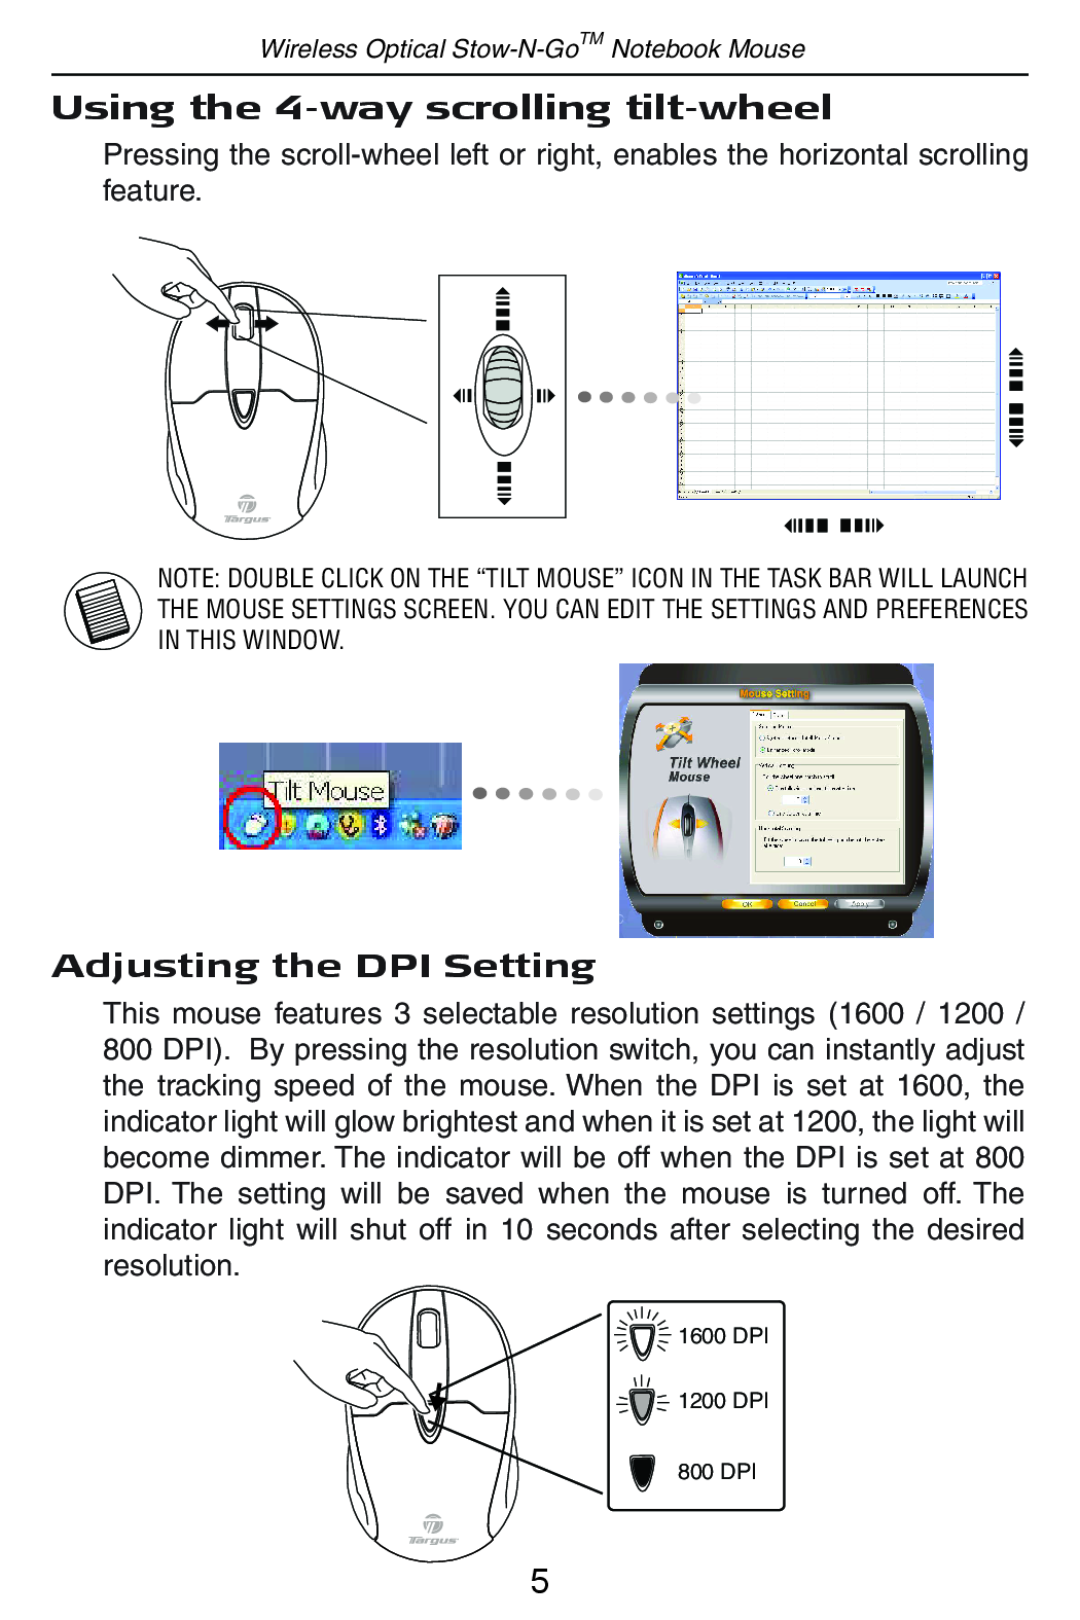 Targus Wireless Optical Stow-N-GoTM Notebook Mouse 30 Using the 4-way scrolling tilt-wheel, Adjusting the DPI Setting 